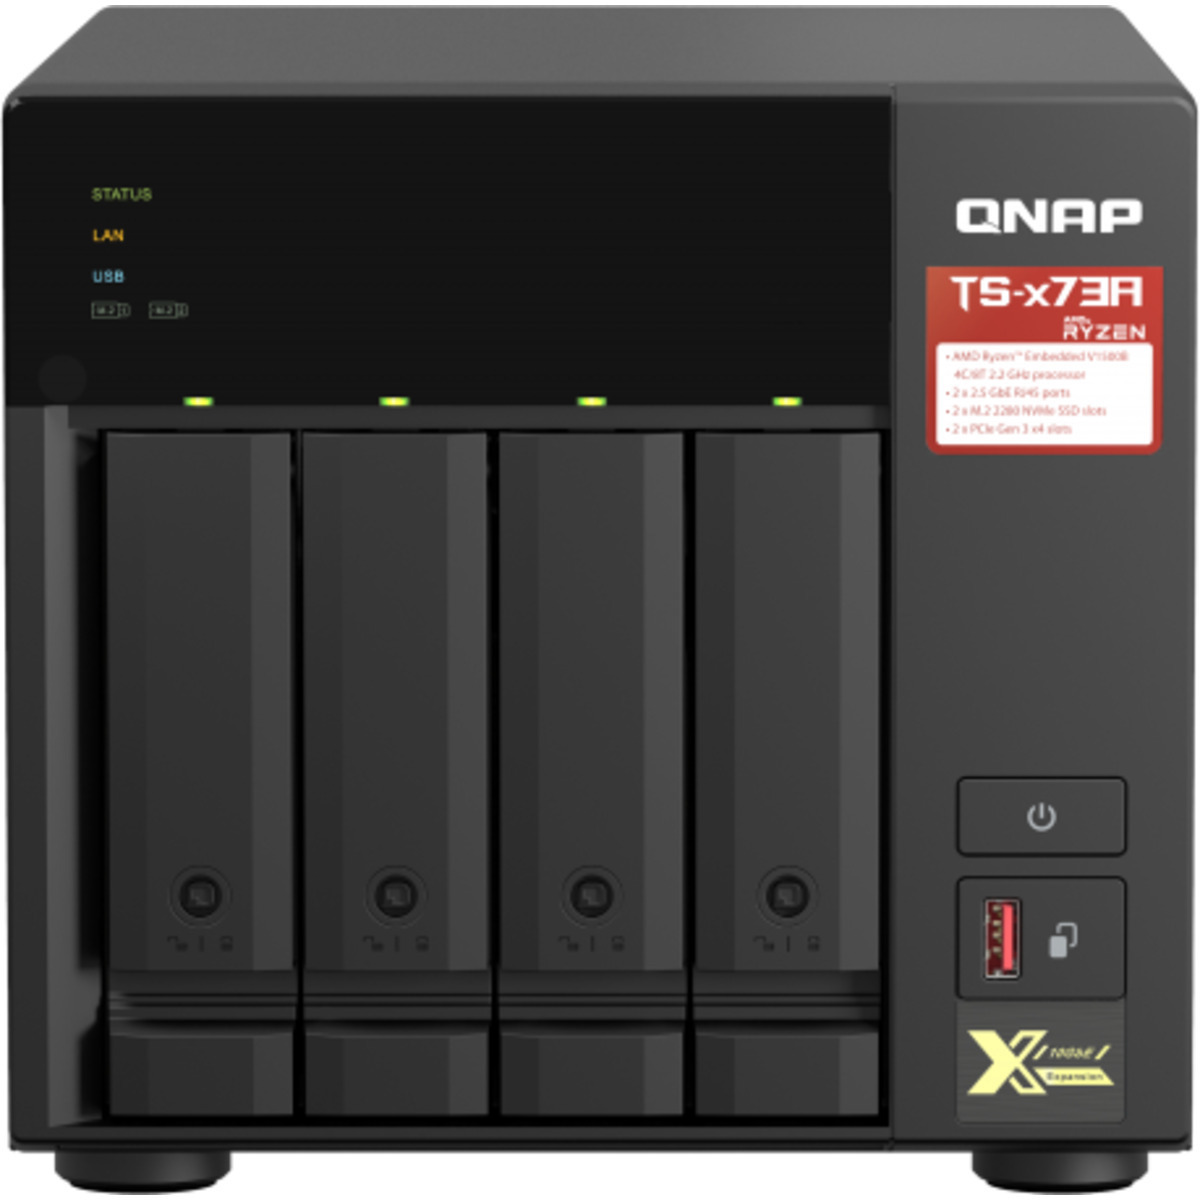 QNAP TS-473A 16tb 4-Bay Desktop Multimedia / Power User / Business NAS - Network Attached Storage Device 4x4tb Sandisk Ultra 3D SDSSDH3-4T00 2.5 560/520MB/s SATA 6Gb/s SSD CONSUMER Class Drives Installed - Burn-In Tested TS-473A